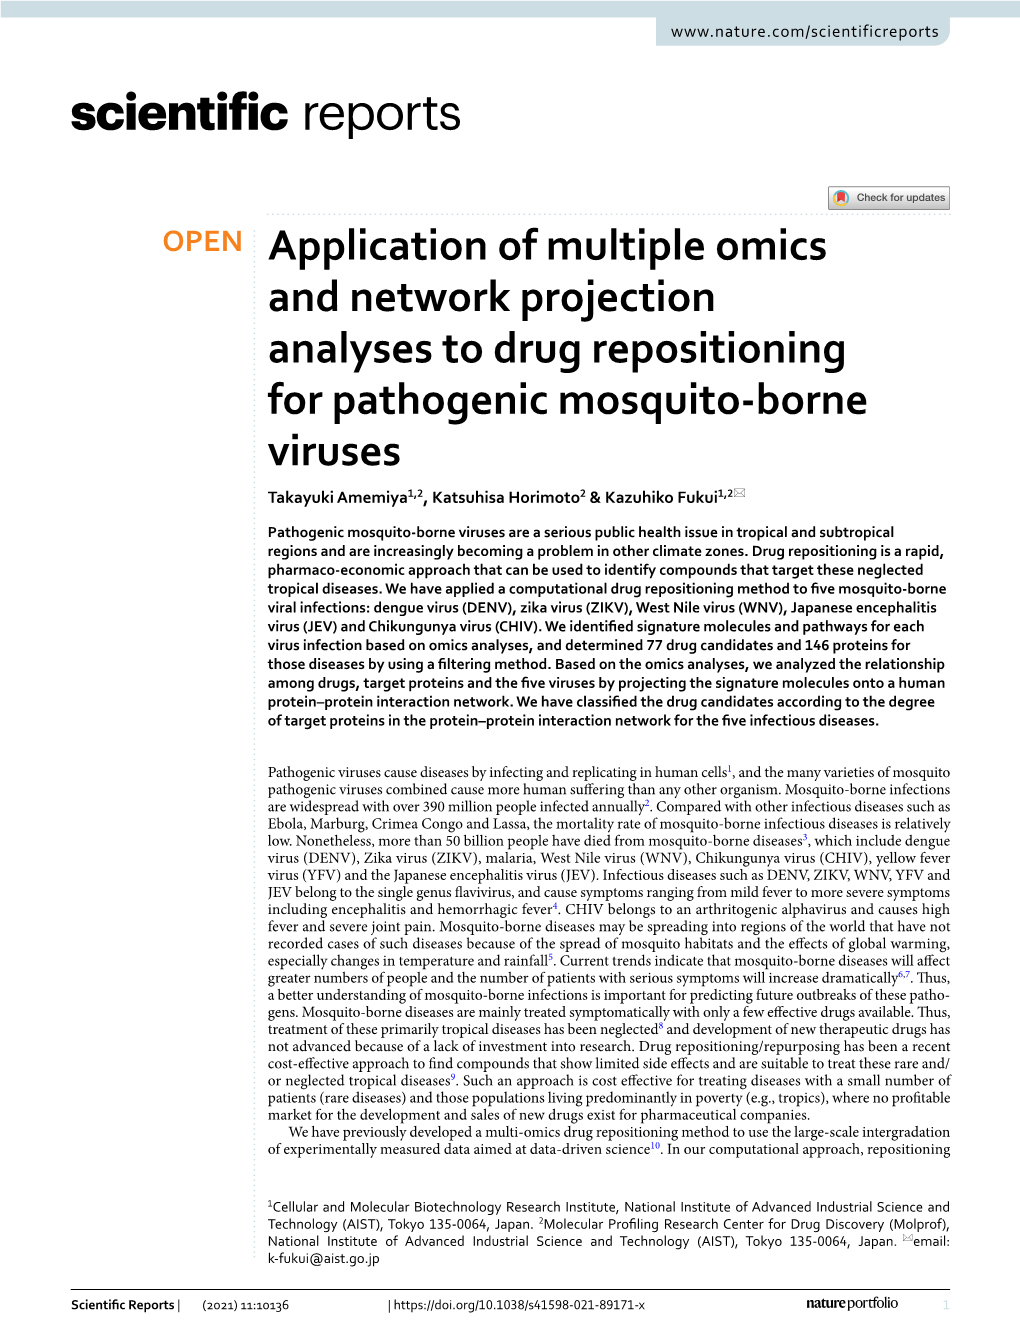 Application of Multiple Omics and Network Projection Analyses to Drug